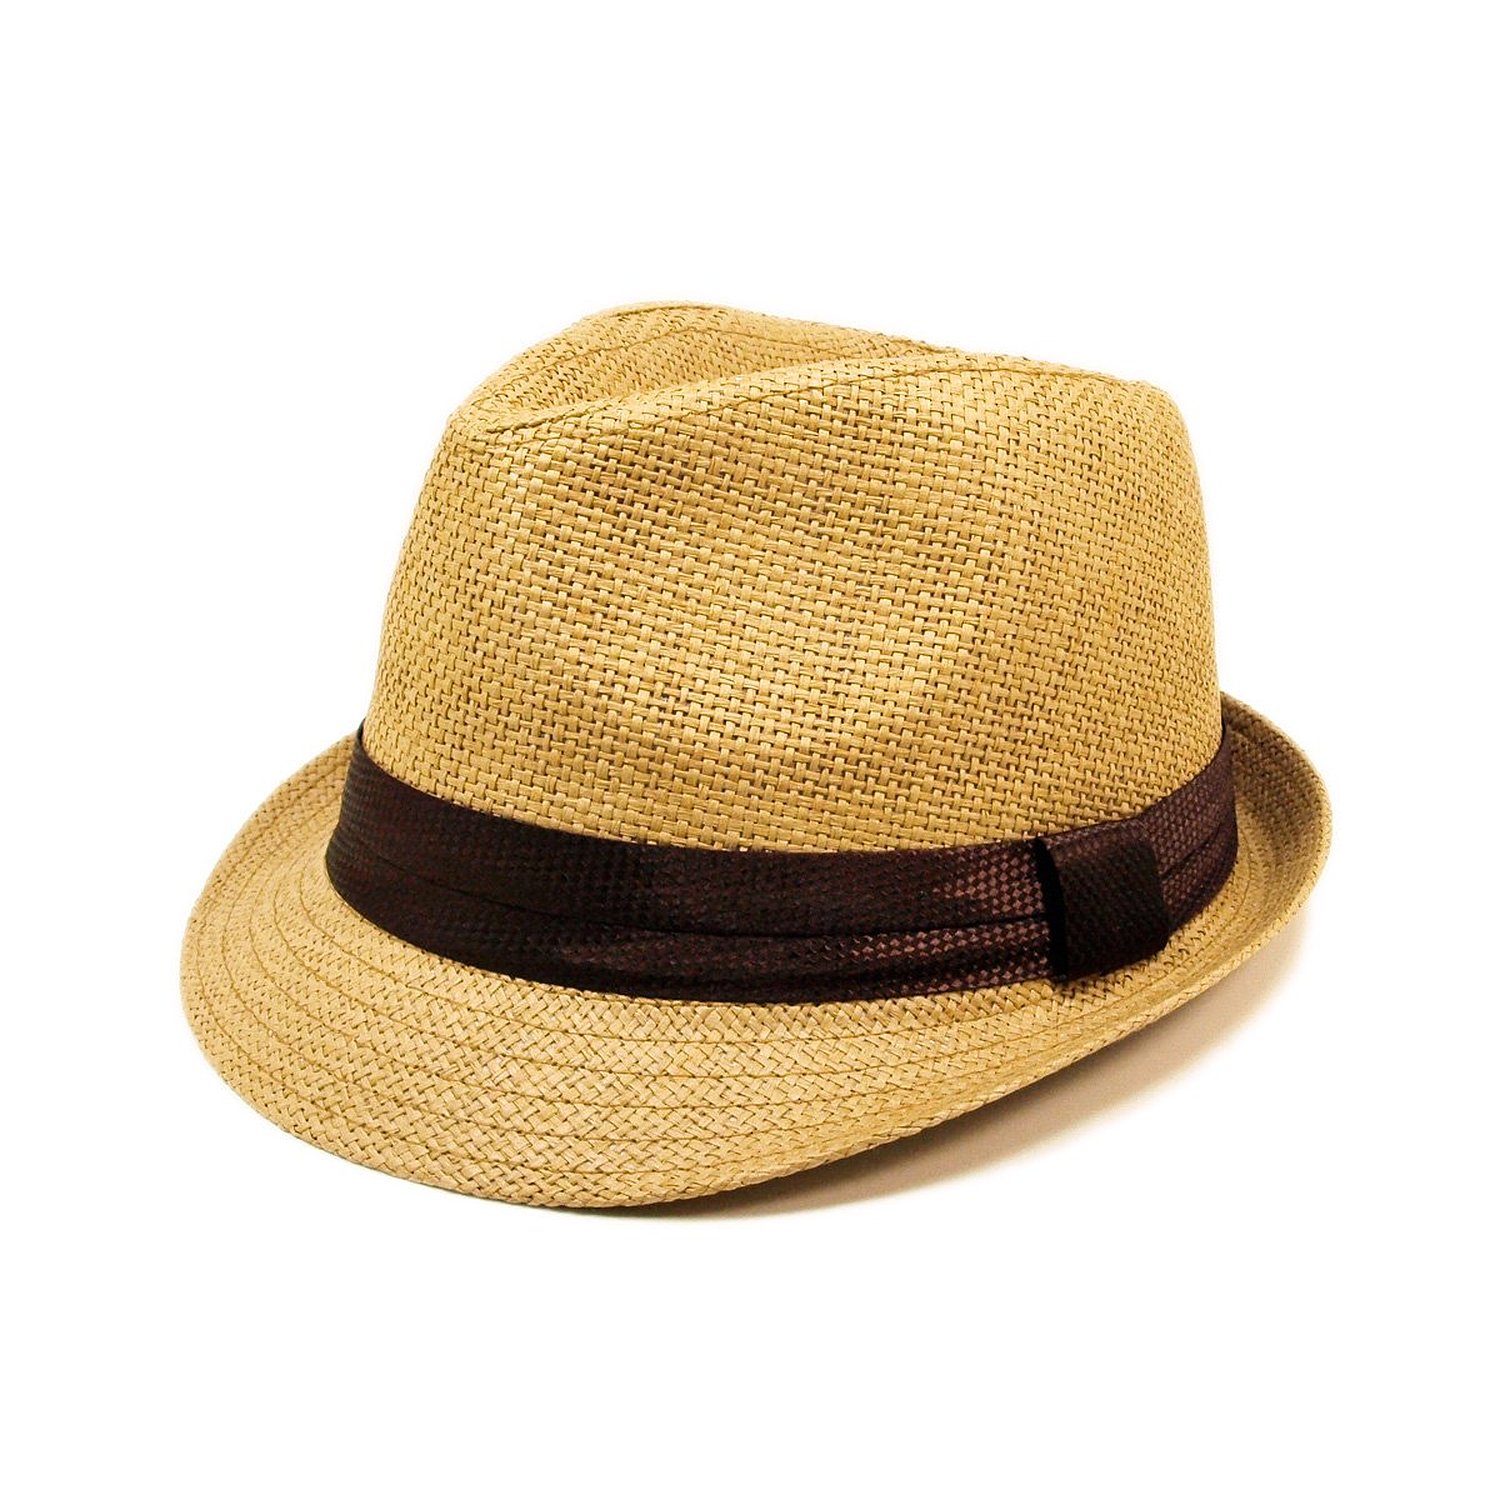 Red Jays Co. Fedora Hat - Natural Color Straw with Black Band, Natural, One Size